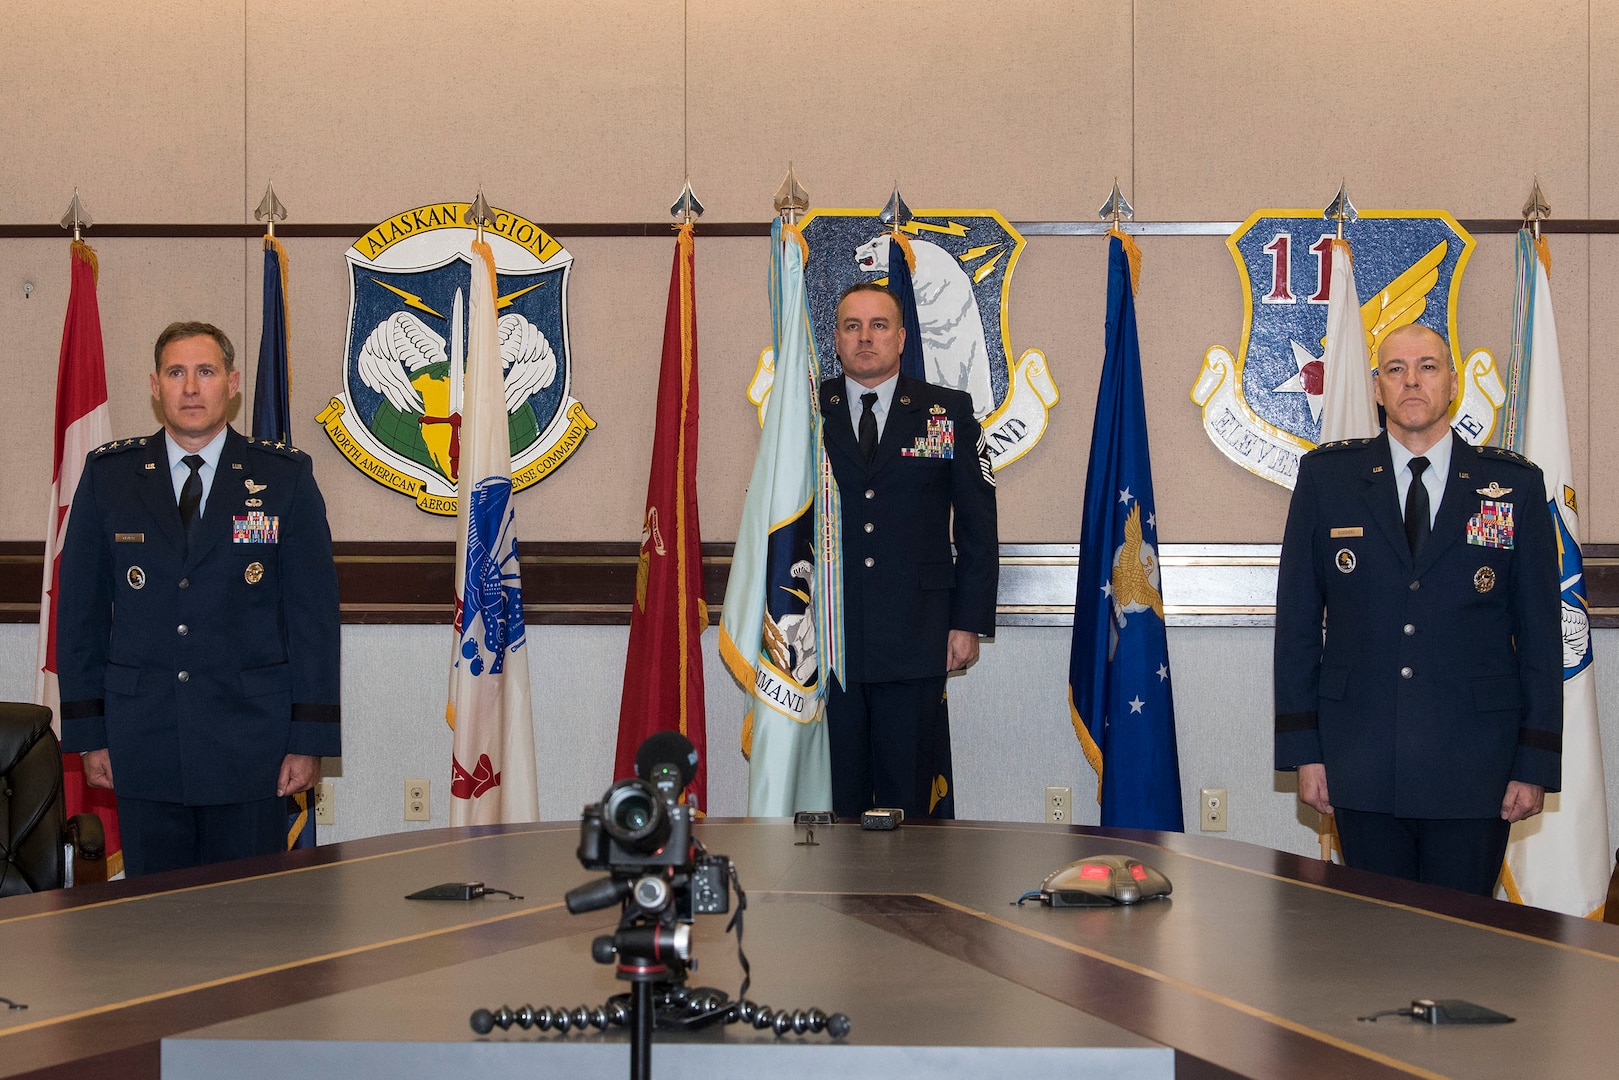 Alaskan Norad Command Region, Alaskan Command, and Eleventh Air Force Welcomes New Commander